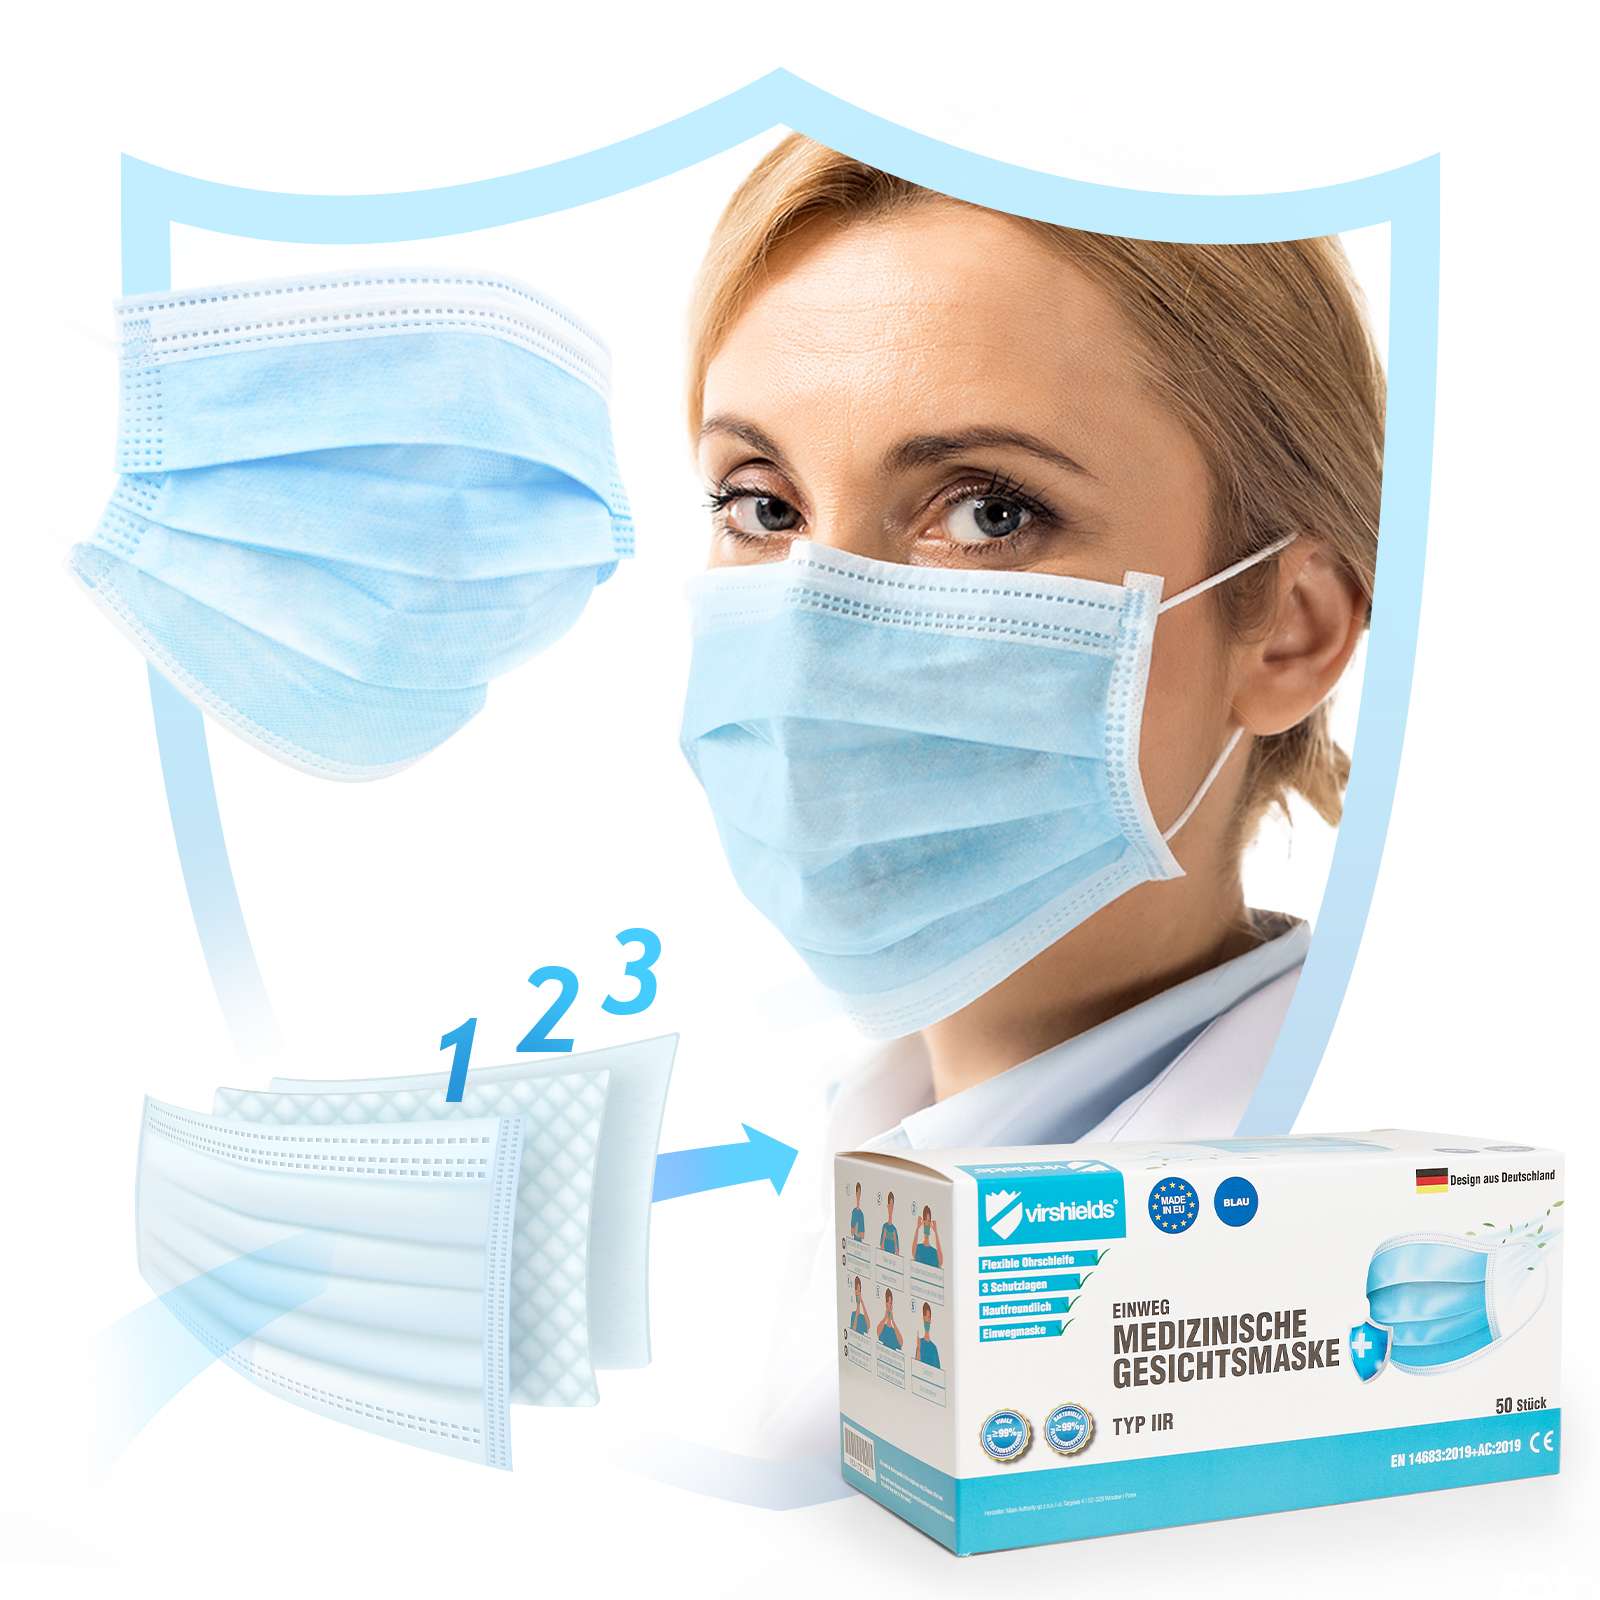 Virshields® Medical Face Mask Typ IIR (Pack of 50) White 175 x 90 mm (VS004)